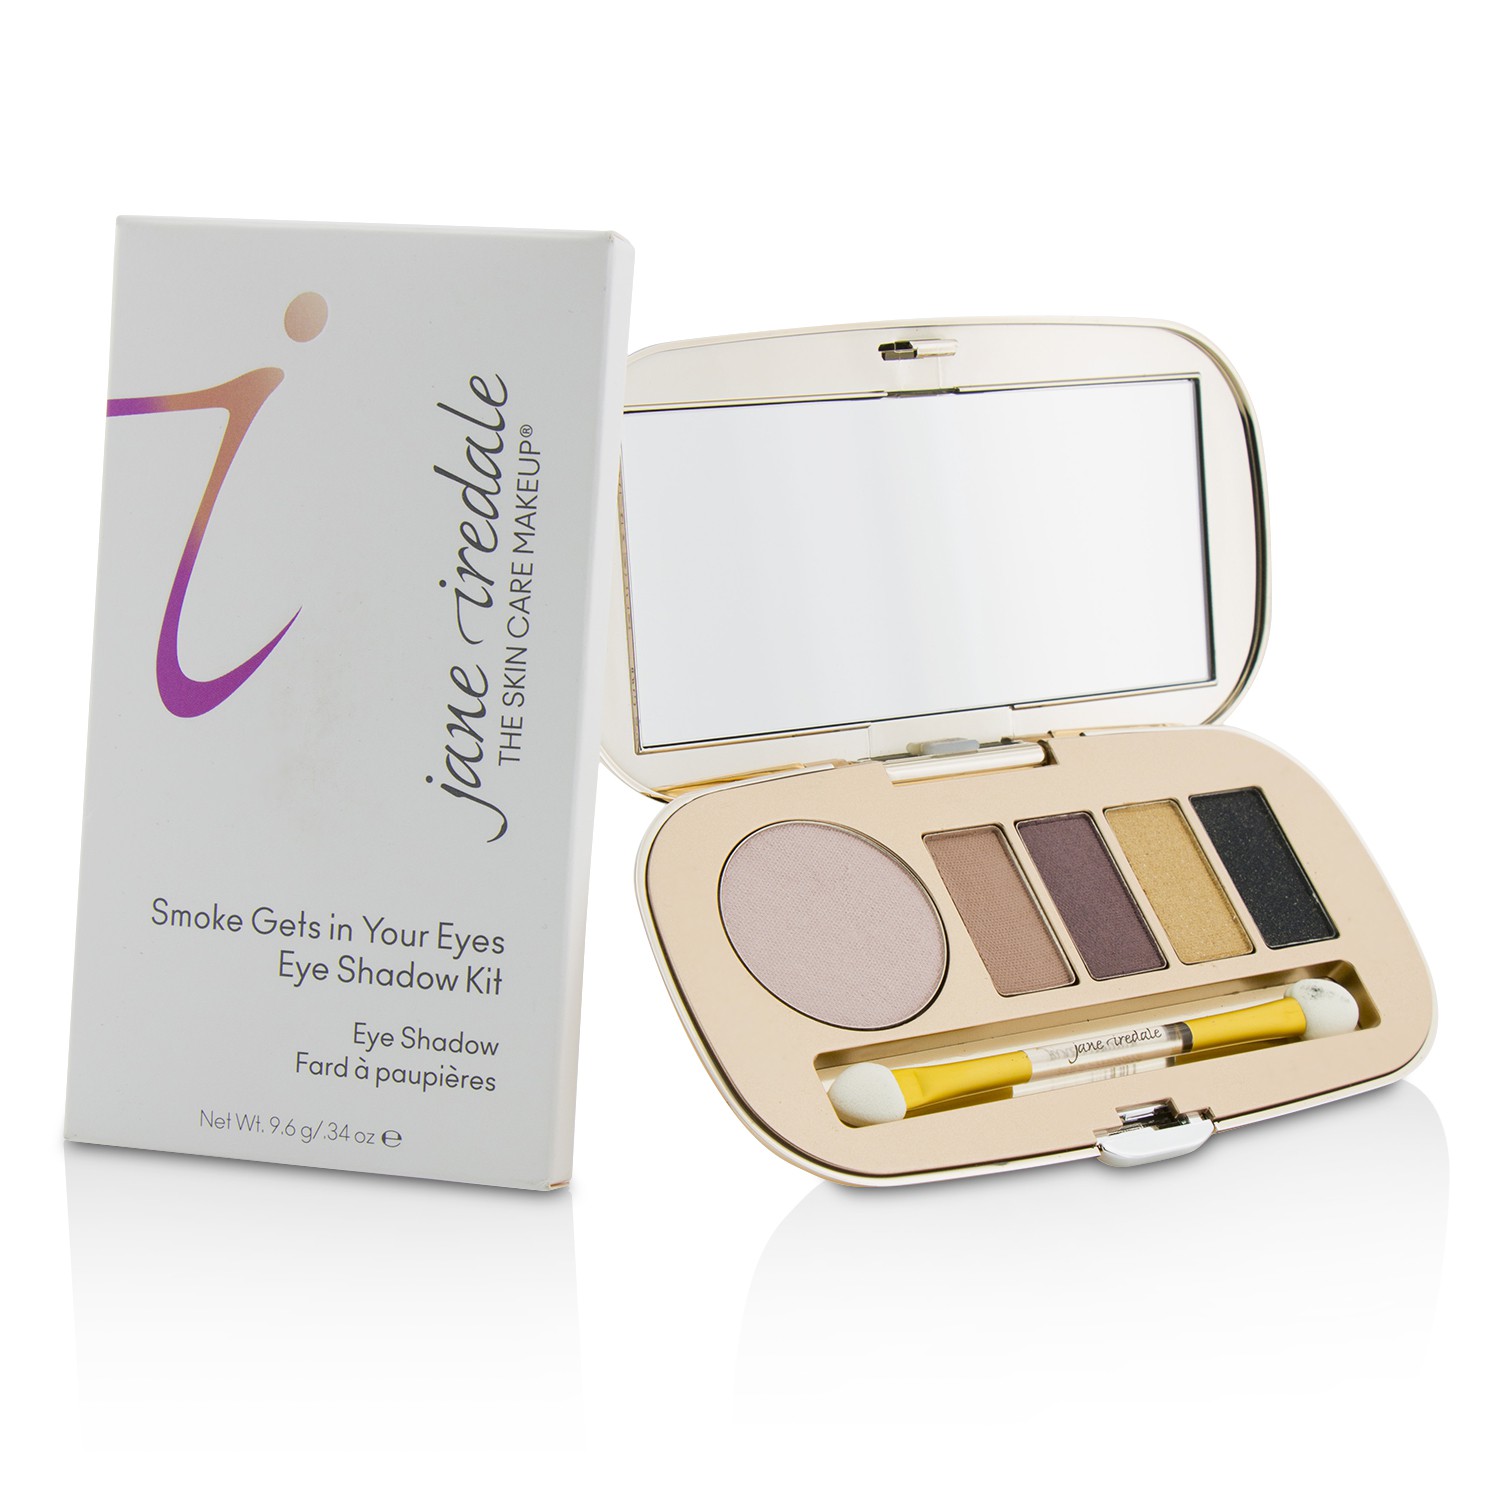 Smoke Gets In Your Eyes Eye Shadow Kit (New Packaging) Jane Iredale Image